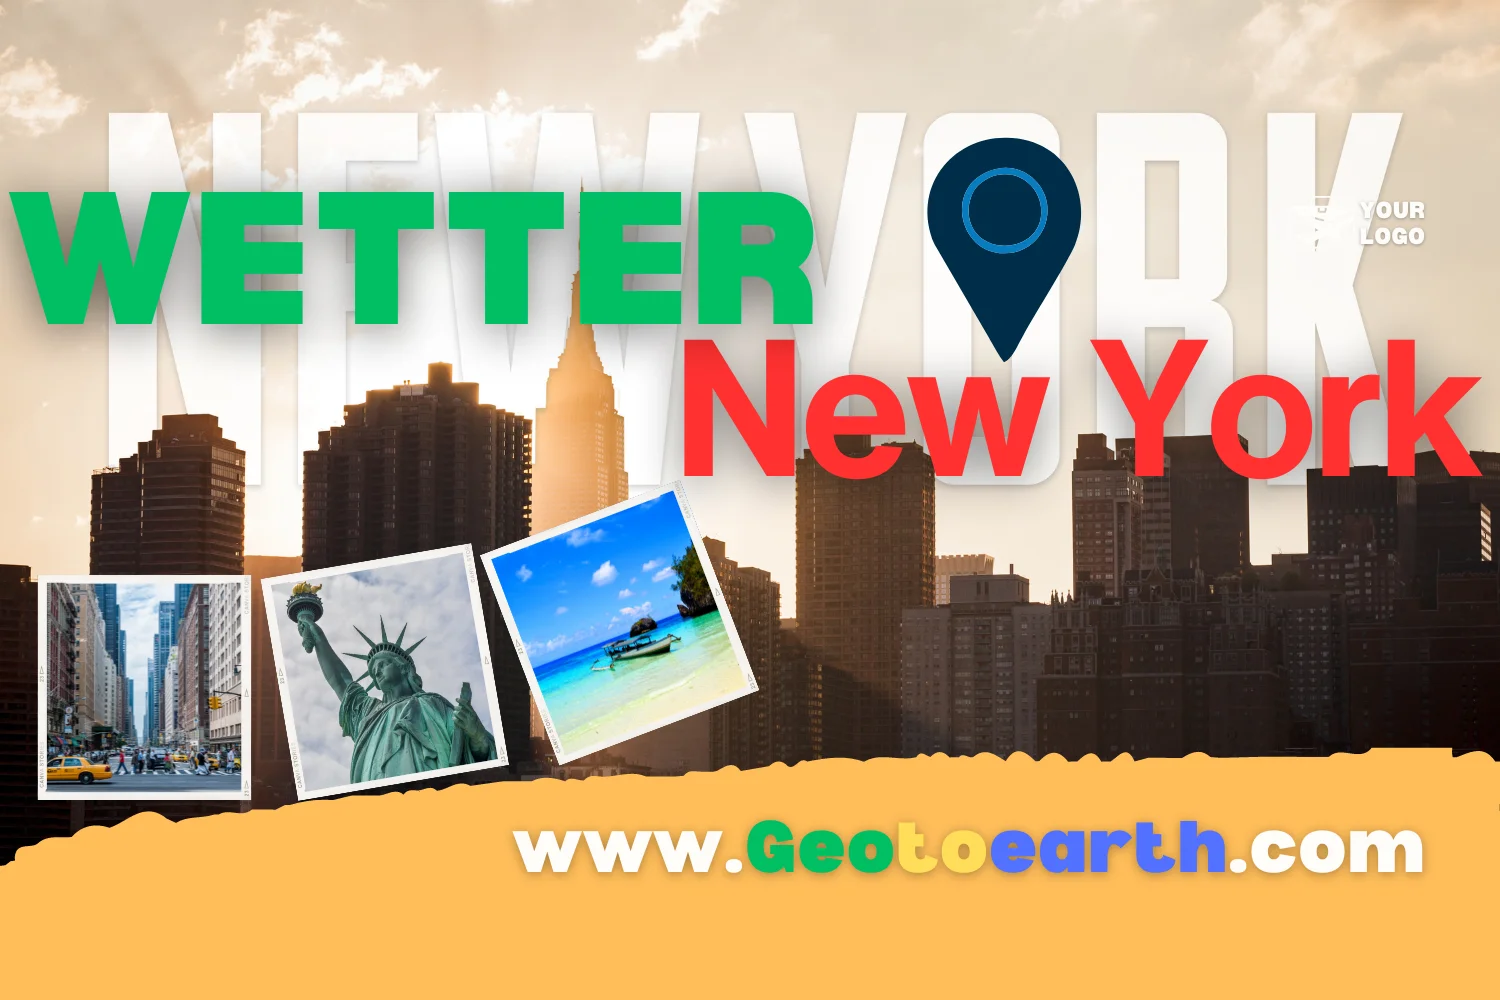 Wetter New York the Rain and Shine |Top 10 features|